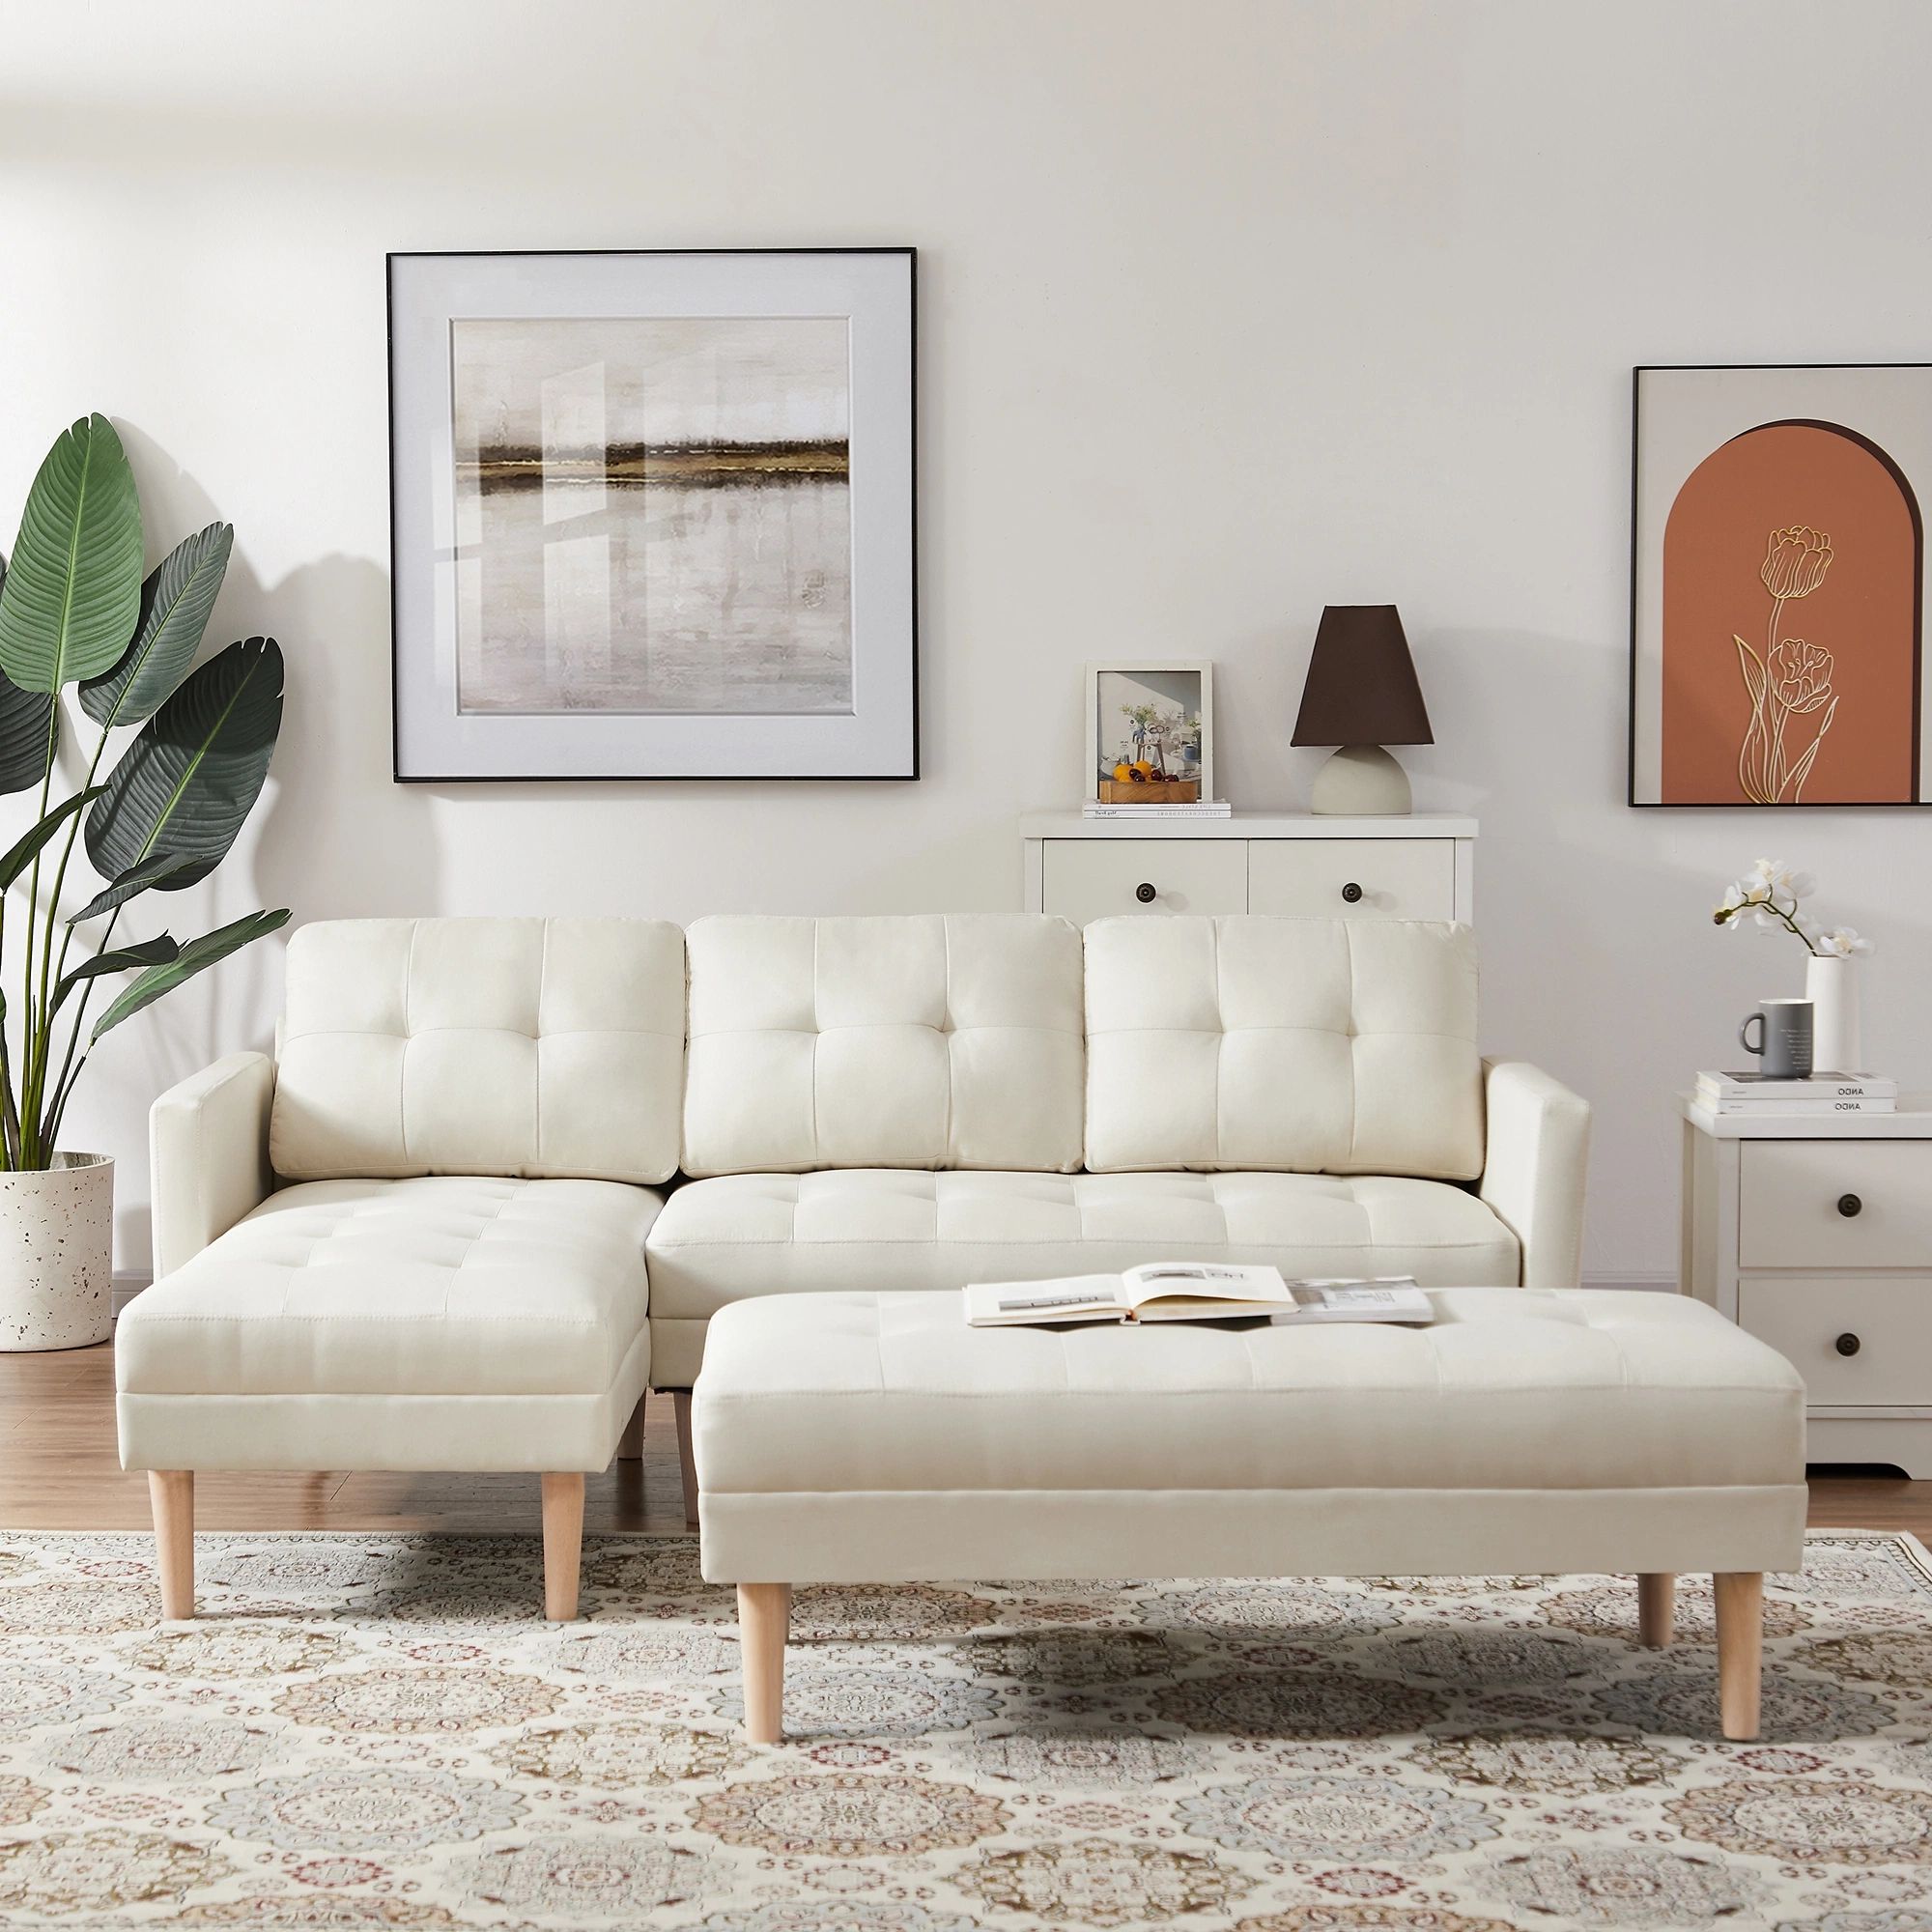 Dropship Beige Sectional Sofa Bed , L Shape Chaise Lounge With Ottoman  Bench To Sell Online At A Lower Price | Doba Throughout Beige L Shaped Sectional Sofas (View 13 of 15)